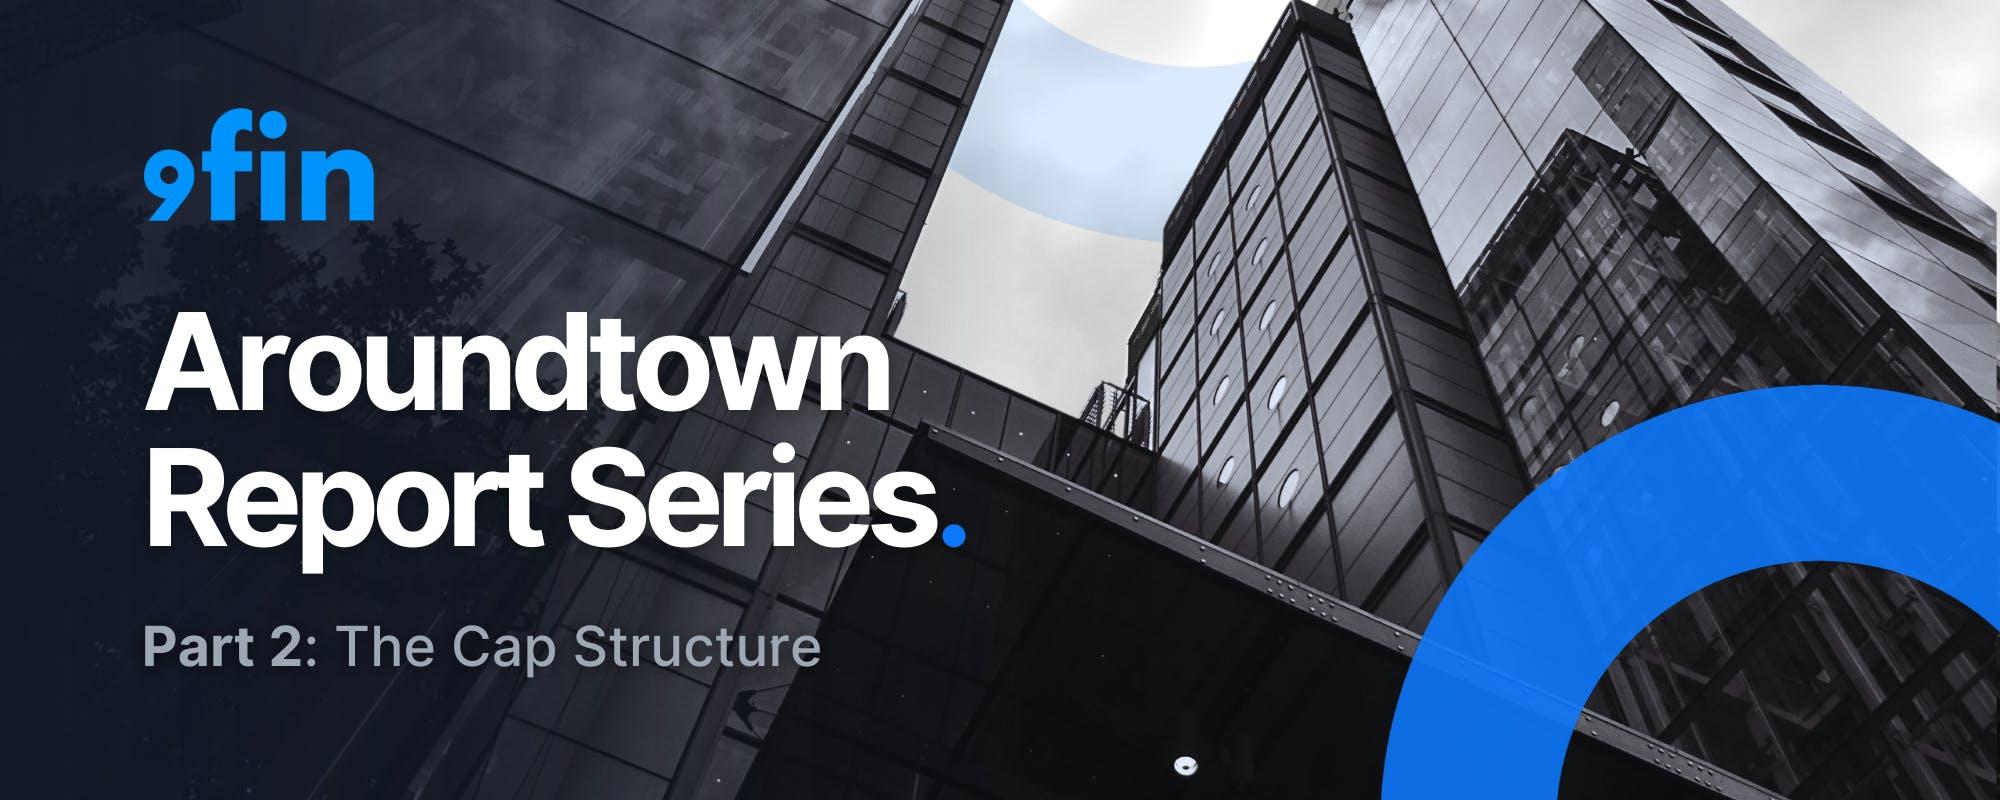 Aroundtown Report Series Part 2 – The Cap Structure